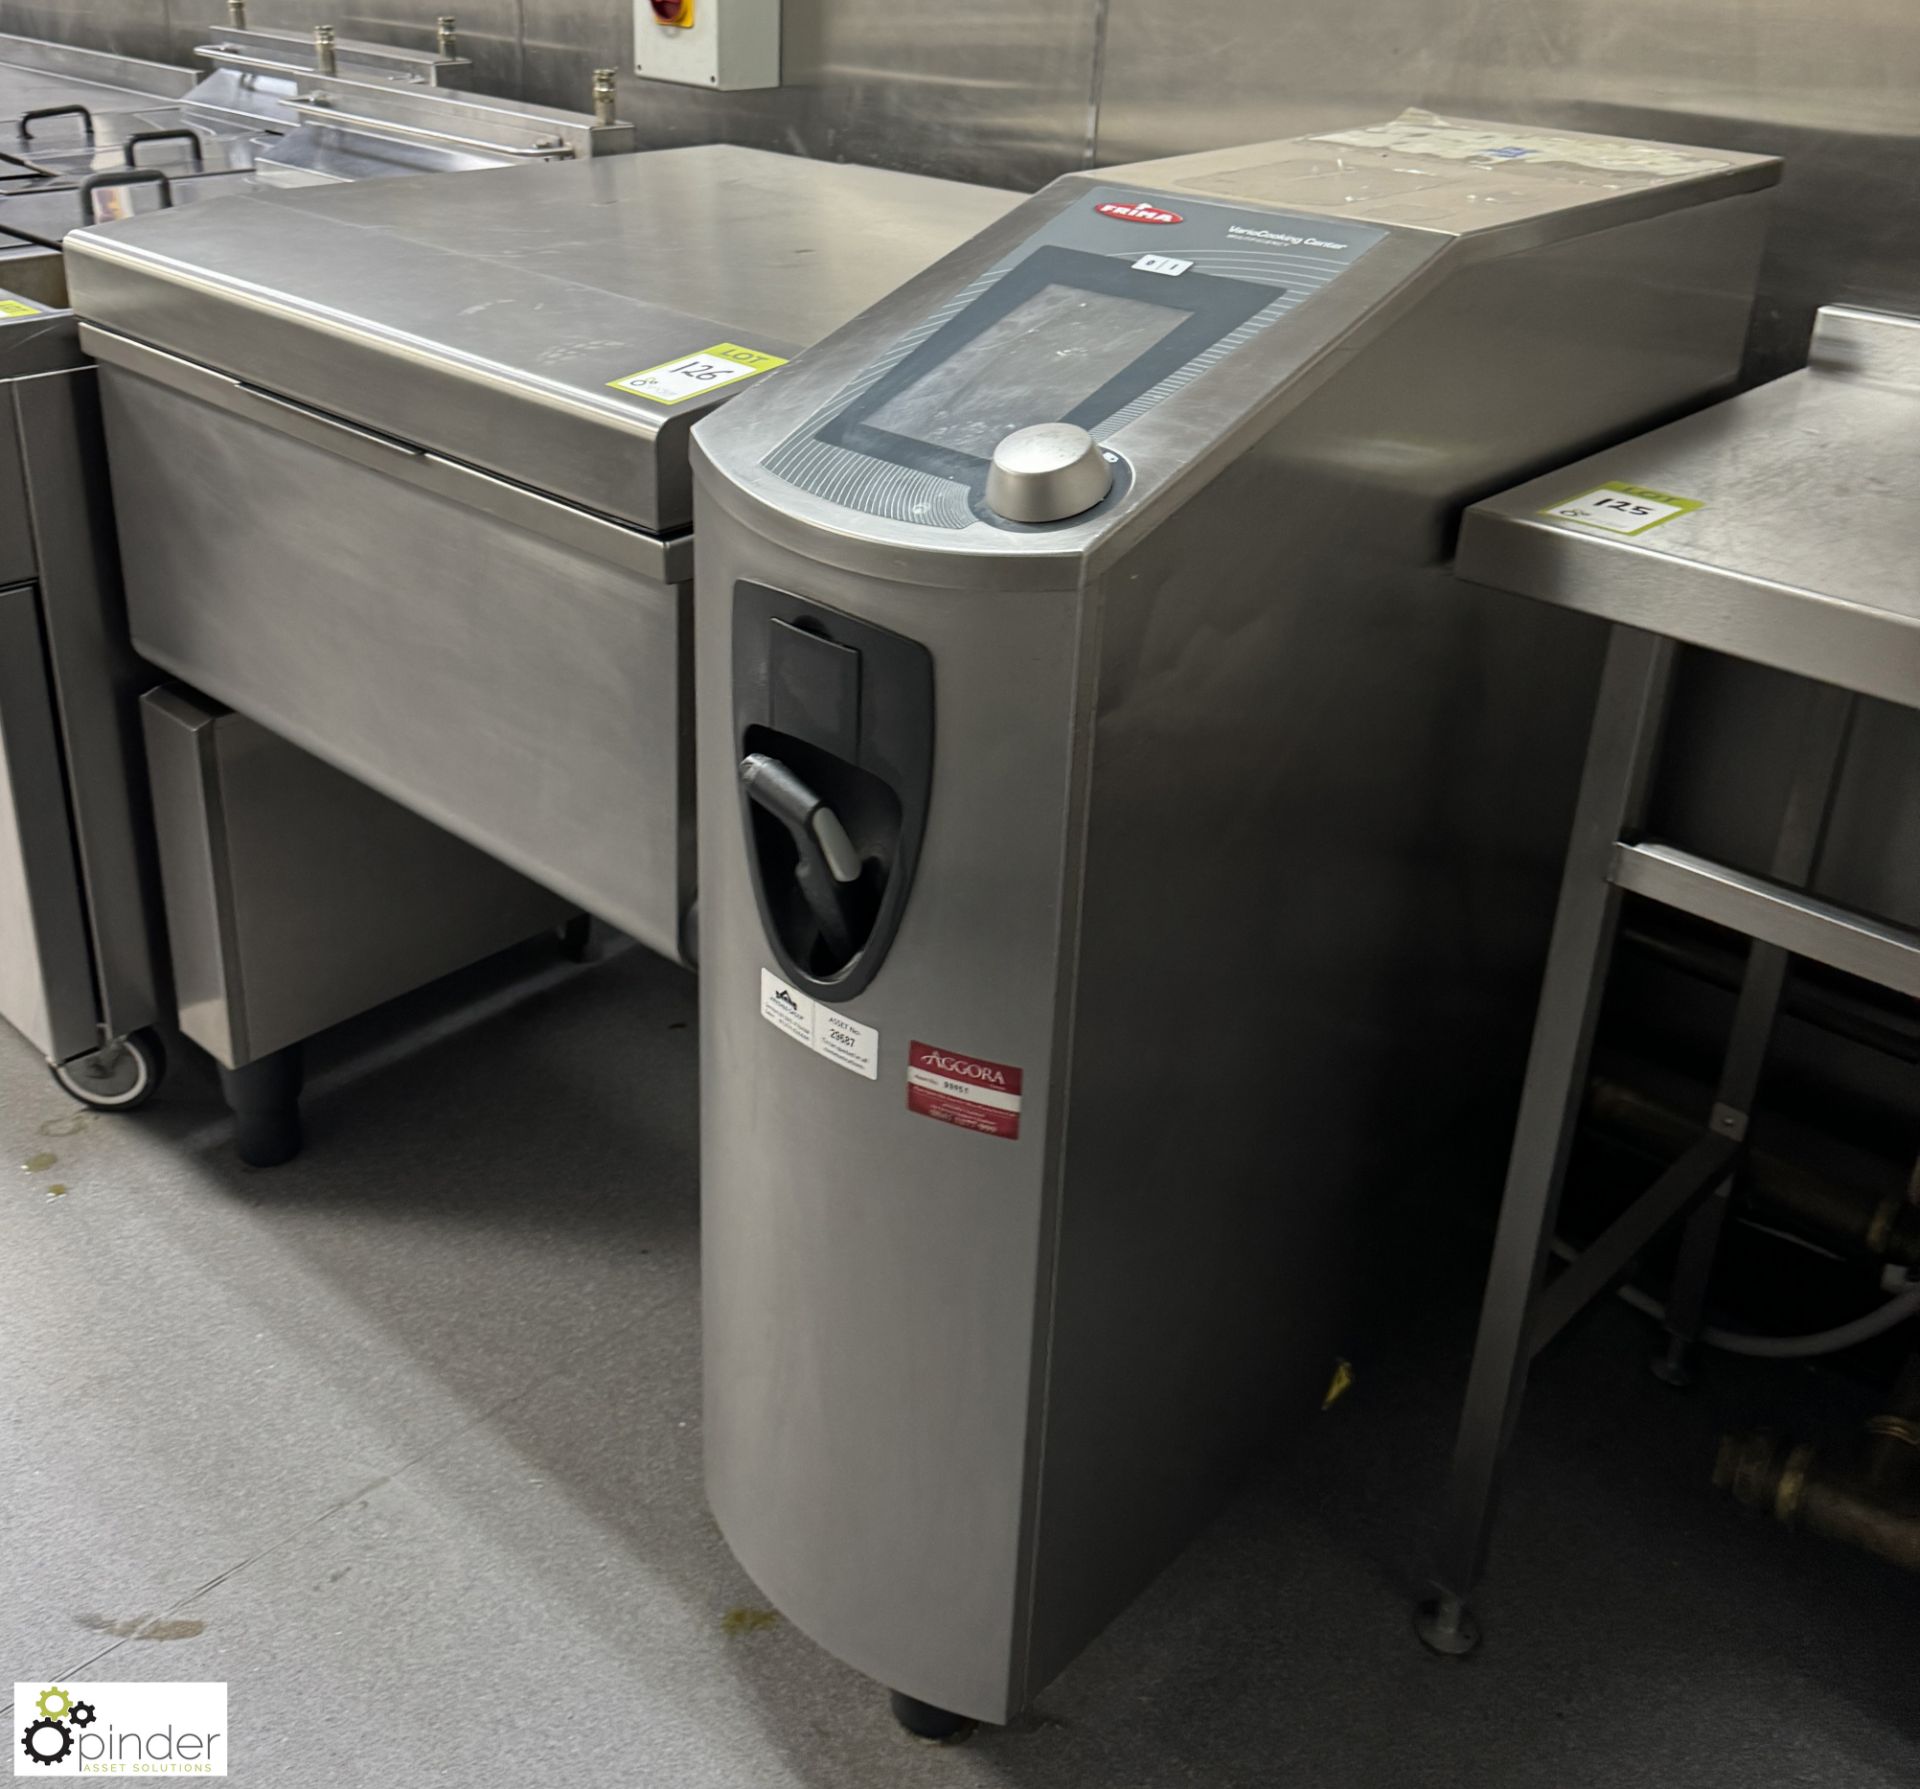 Frima Vario Cooking Centre, 415volts, 1180mm x 920mm x 1110mm (location in building - level 11 - Image 3 of 4